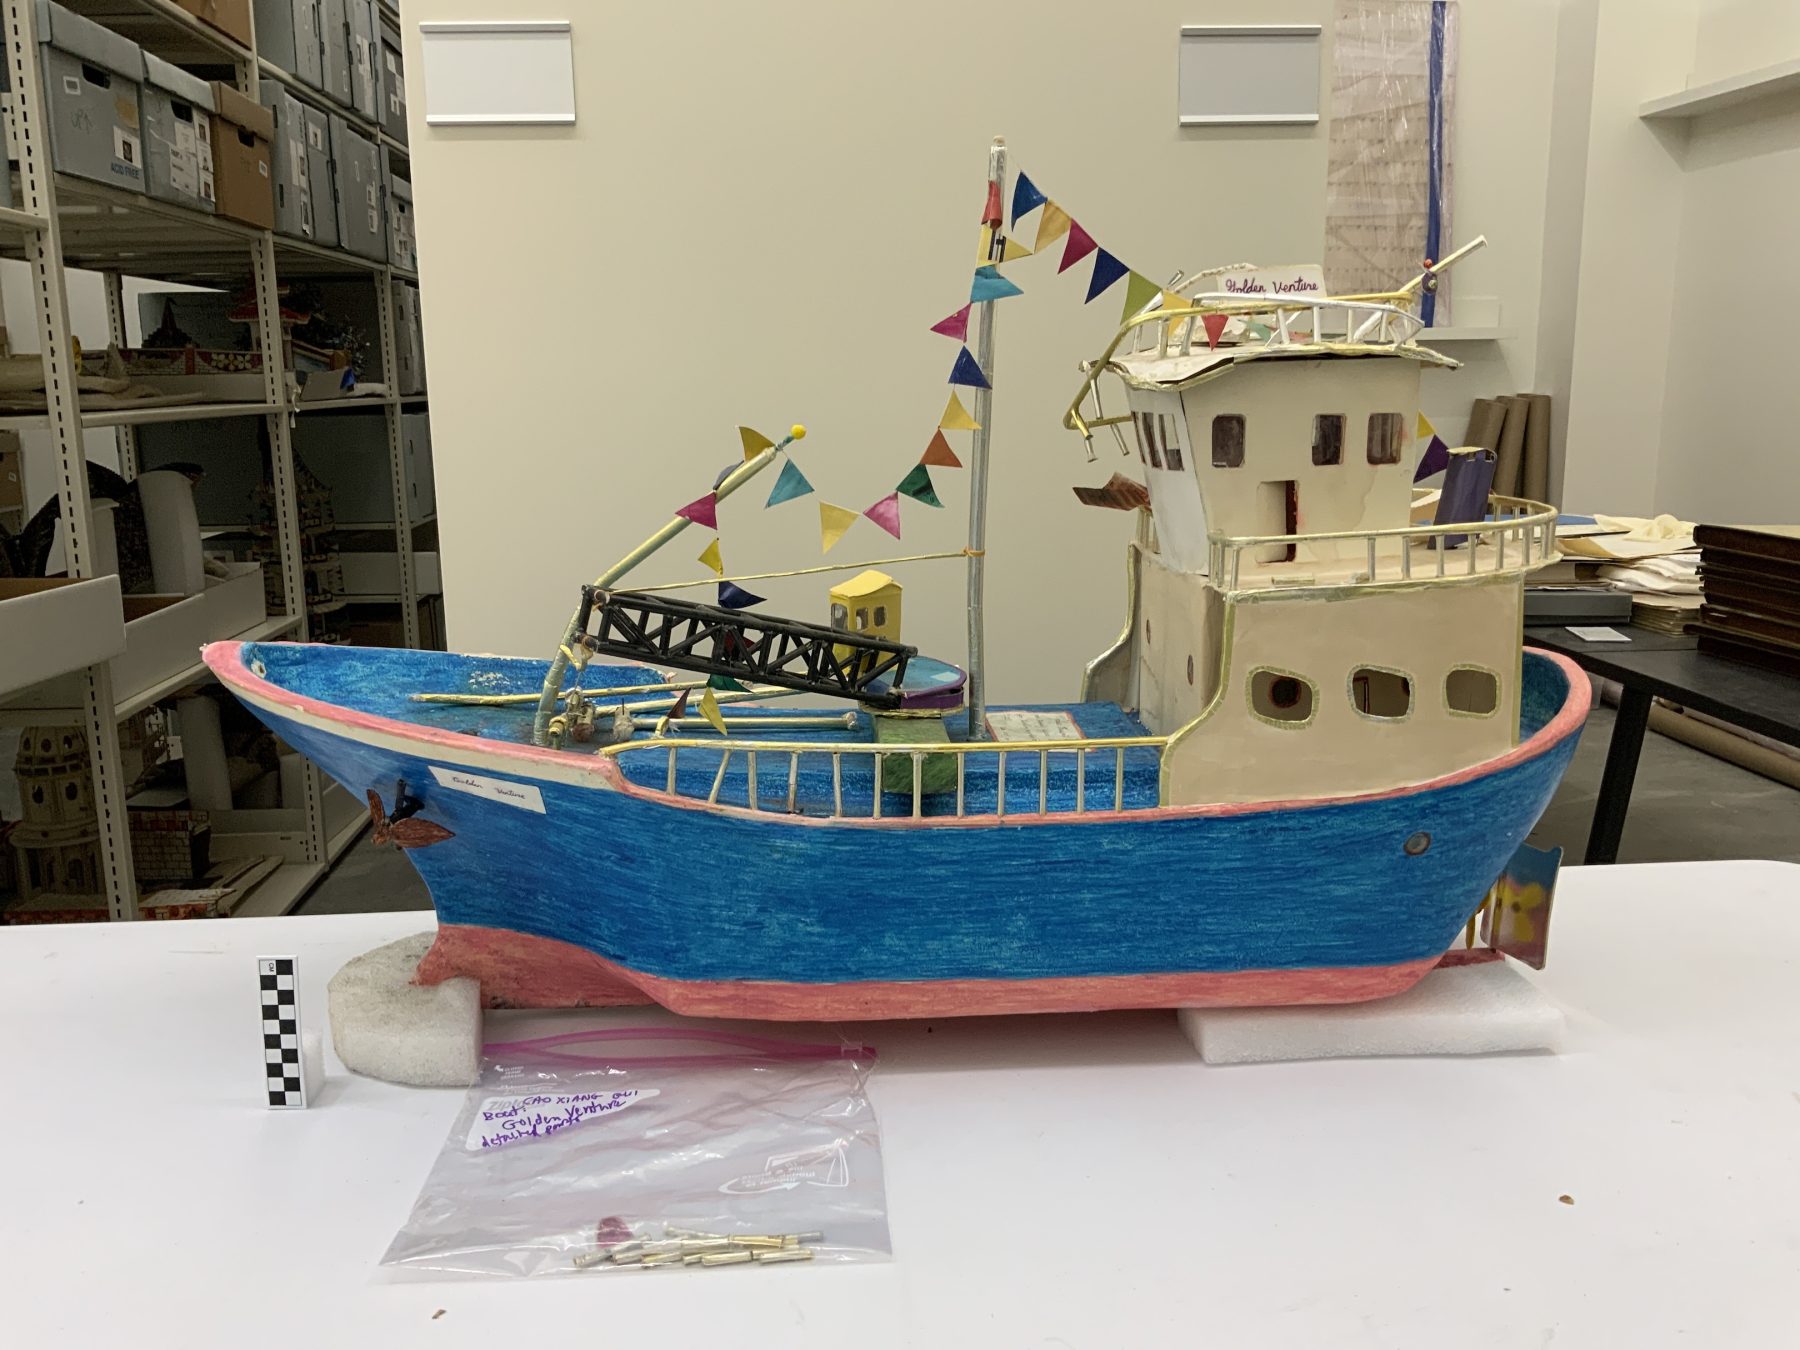 1996.061.045 Paper sculpture of the Golden Venture ship made by one of the refugees detained after this vessel ran aground at Rockaway Beach, Queens in 1993. Papier-mâché and colored marker, 1993-1996. Photograph taken post-fire. Museum of Chinese in America (MOCA) Fly to Freedom Collection.